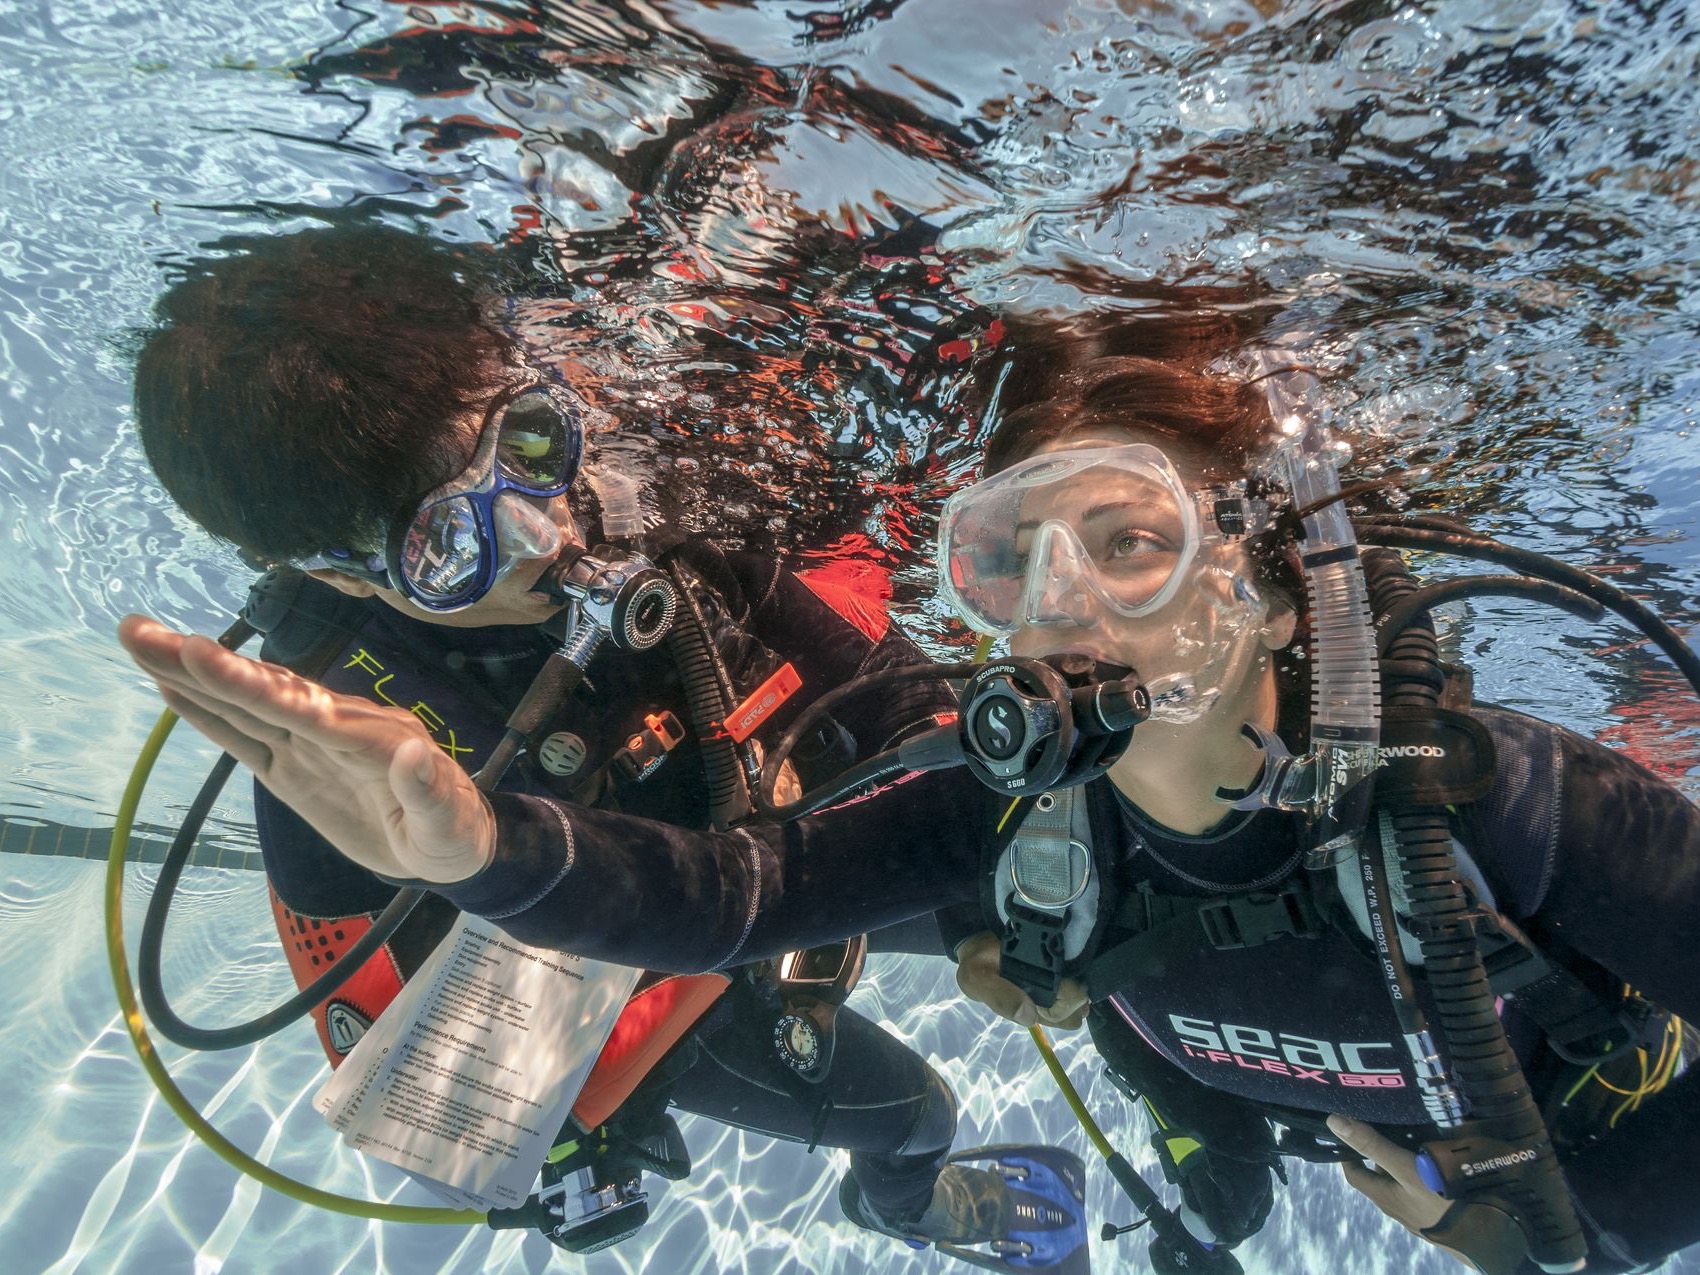 padi speciality courses